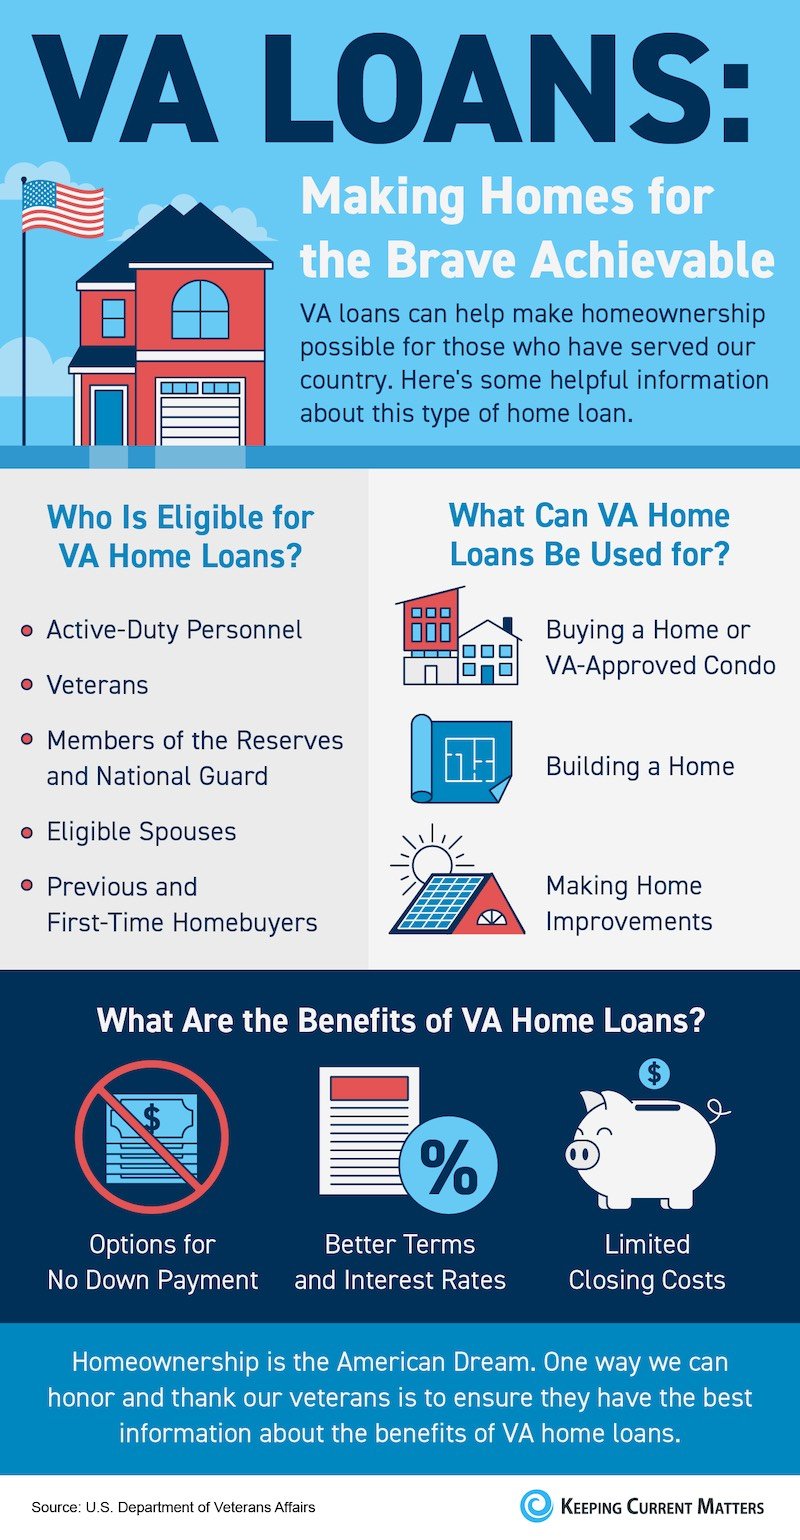 VA Loans: Making Homes for the Brave Achievable [INFOGRAPHIC] | Keeping Current Matters